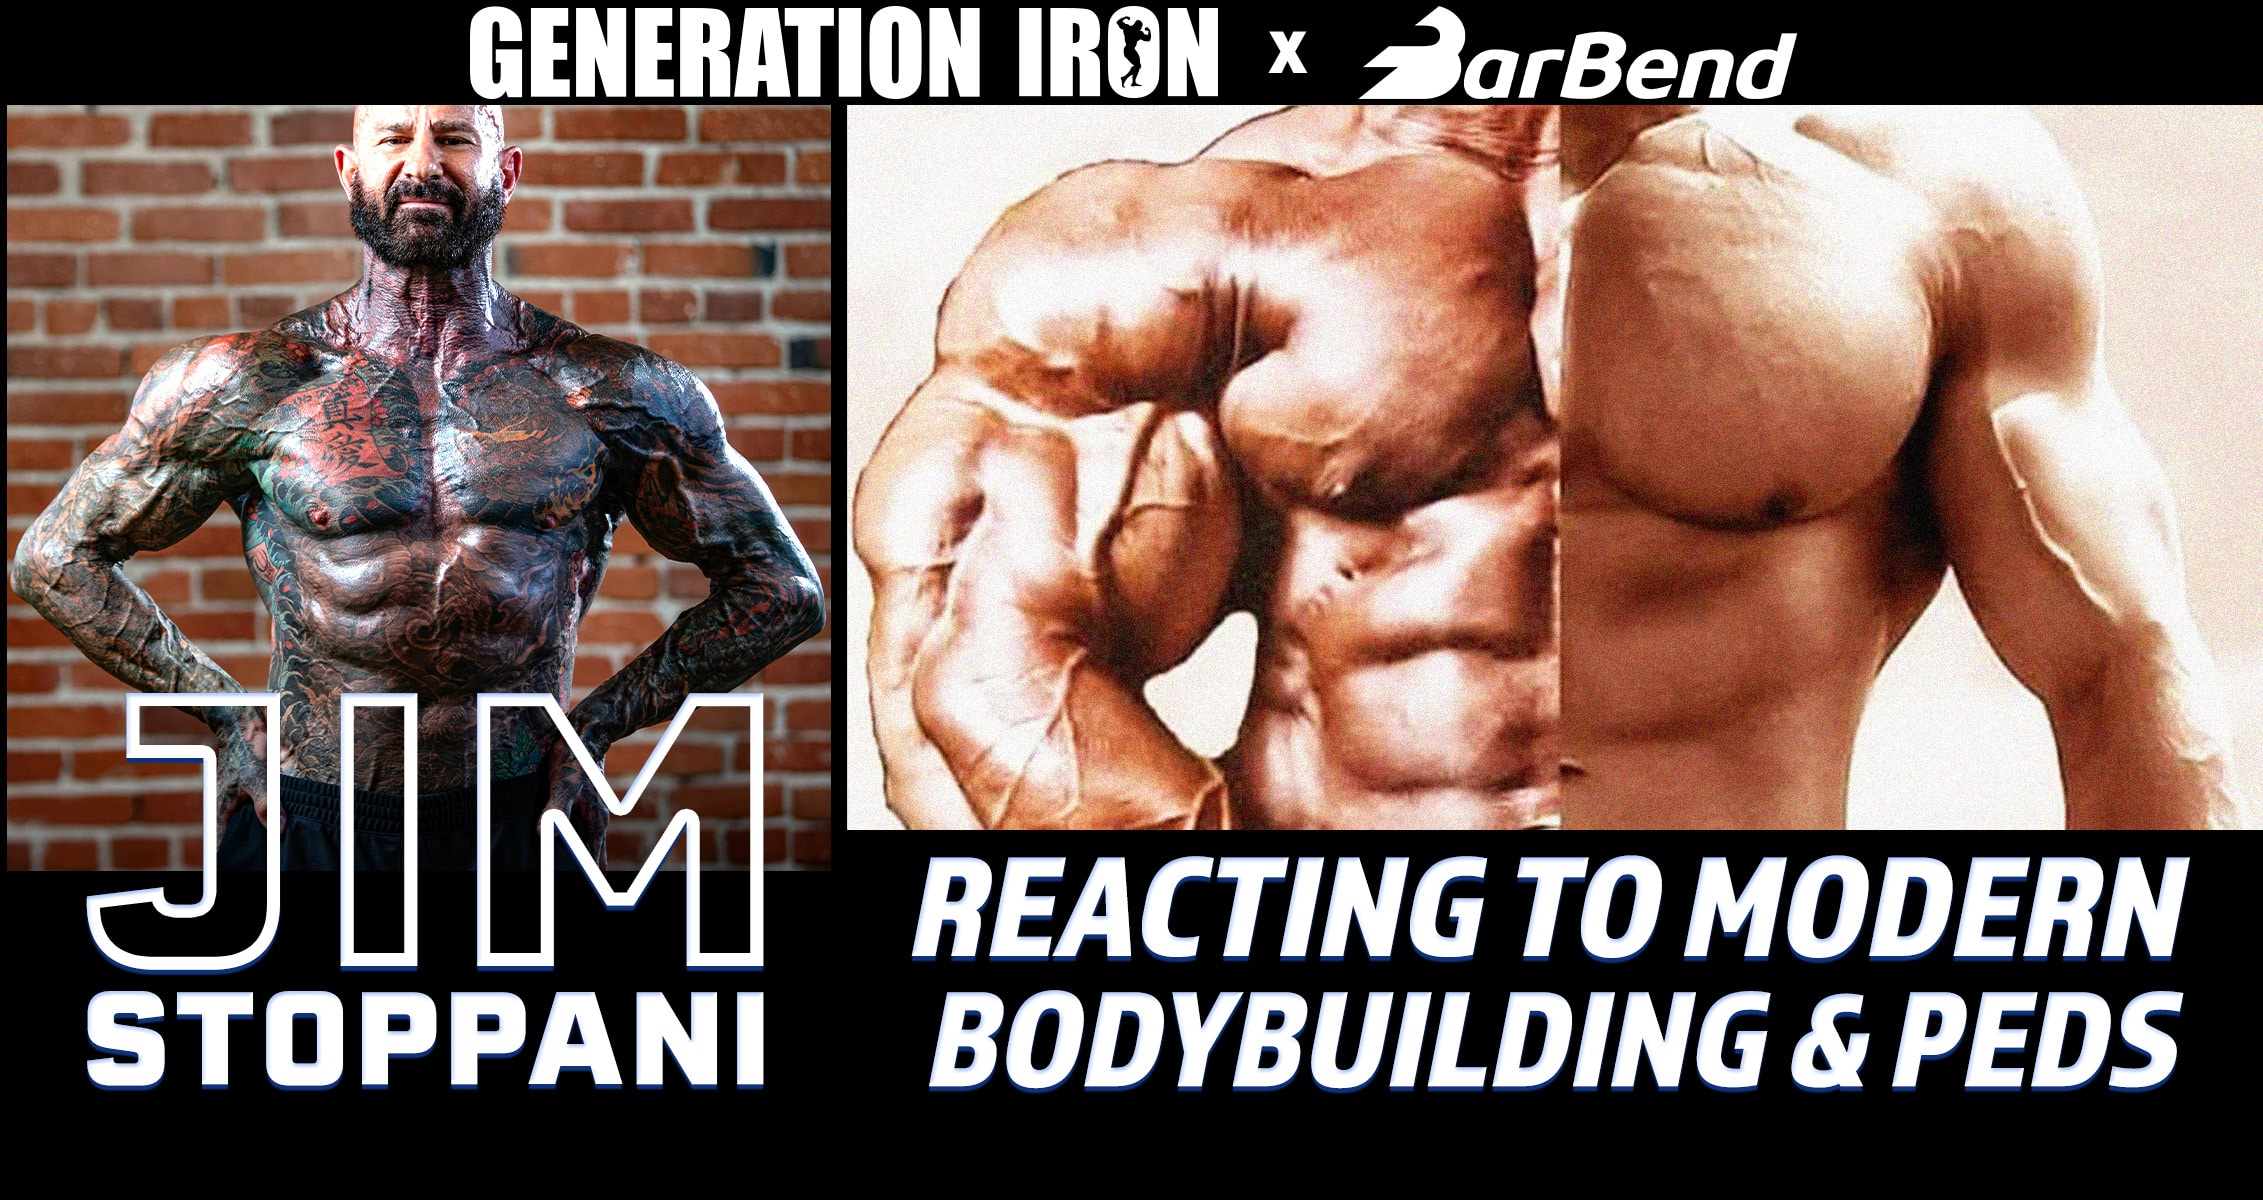 Jim Stoppani On Modern Bodybuilding: “The Sport Is Not Causing Drug Use, The People Are”